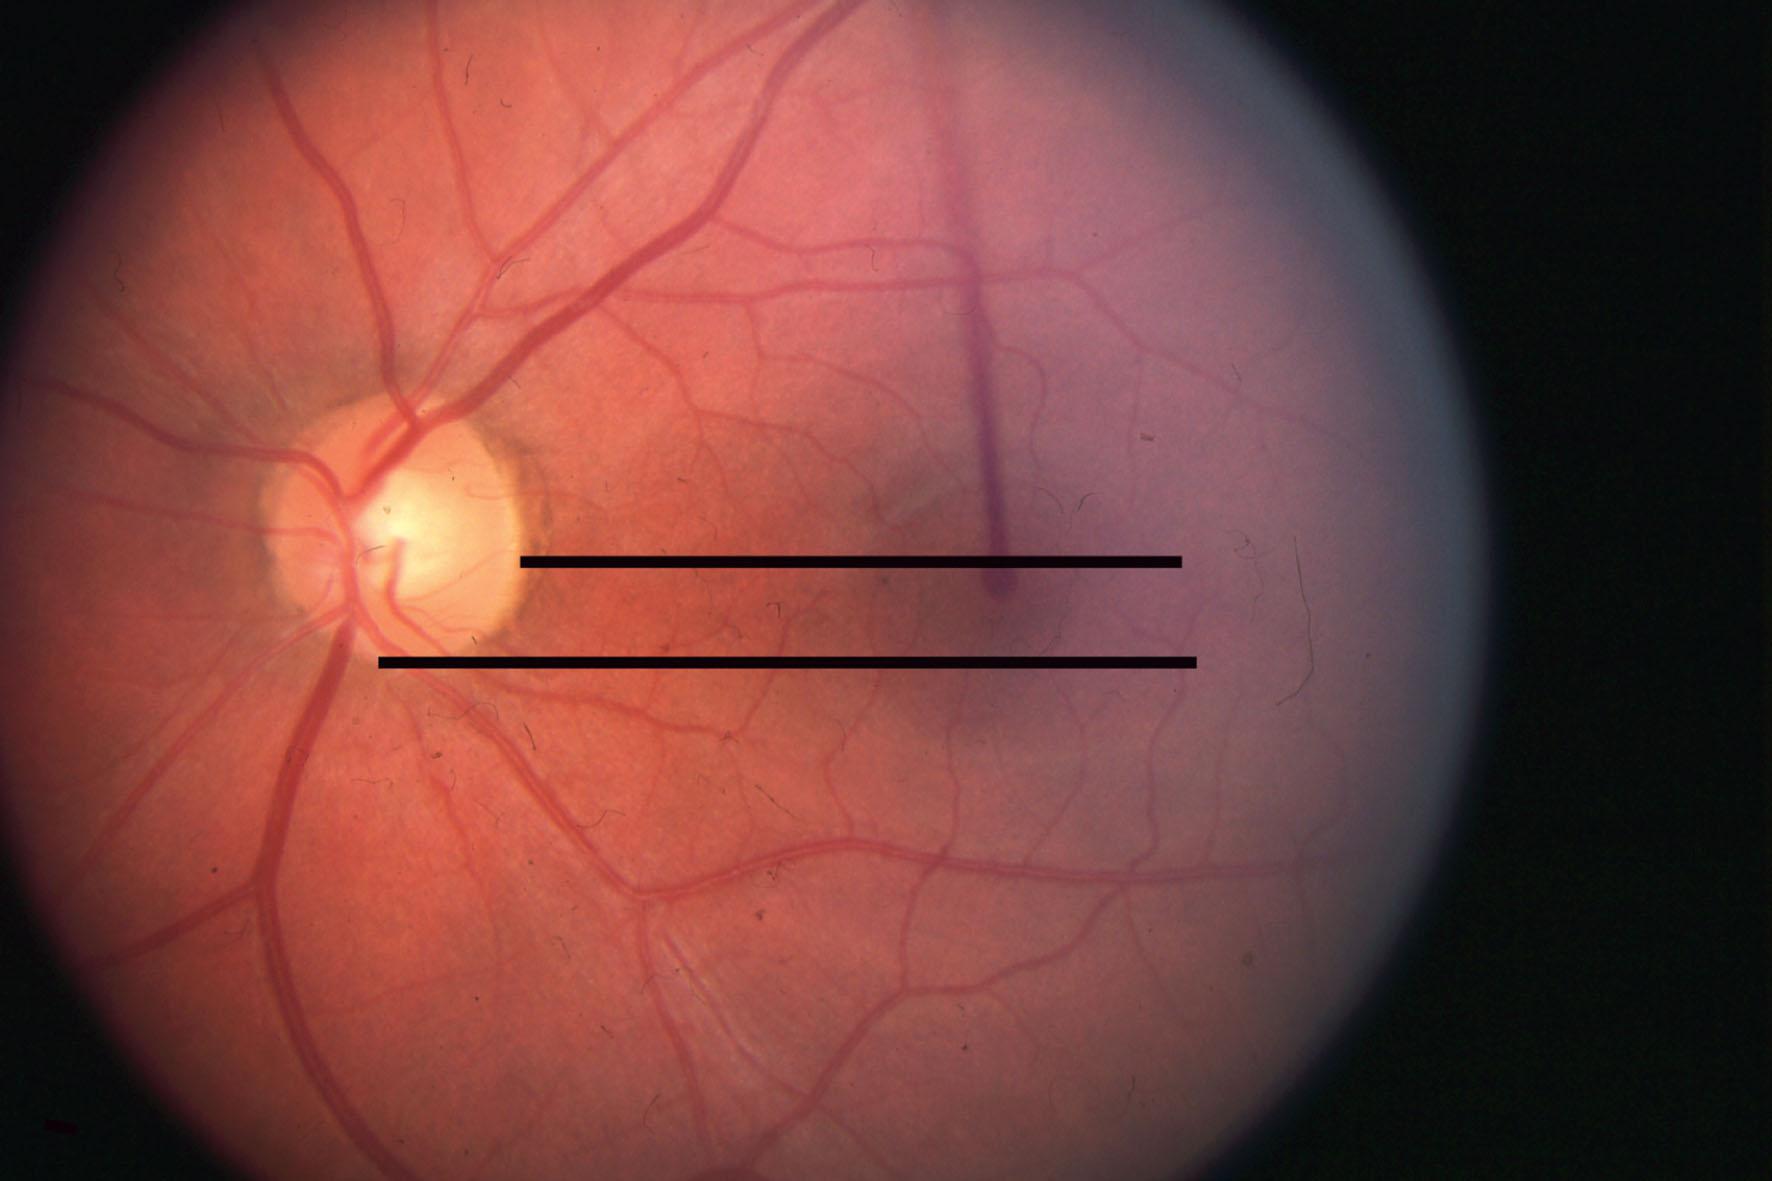 Fig. 82.2, Normal relationship of fovea to disc with respect to torsion. The fovea is normally positioned level with the lower third of the optic disc. The borders of normal lie between the two black lines in the figure. This photograph indicates an absence of objective torsion but is near the border for intorsion.